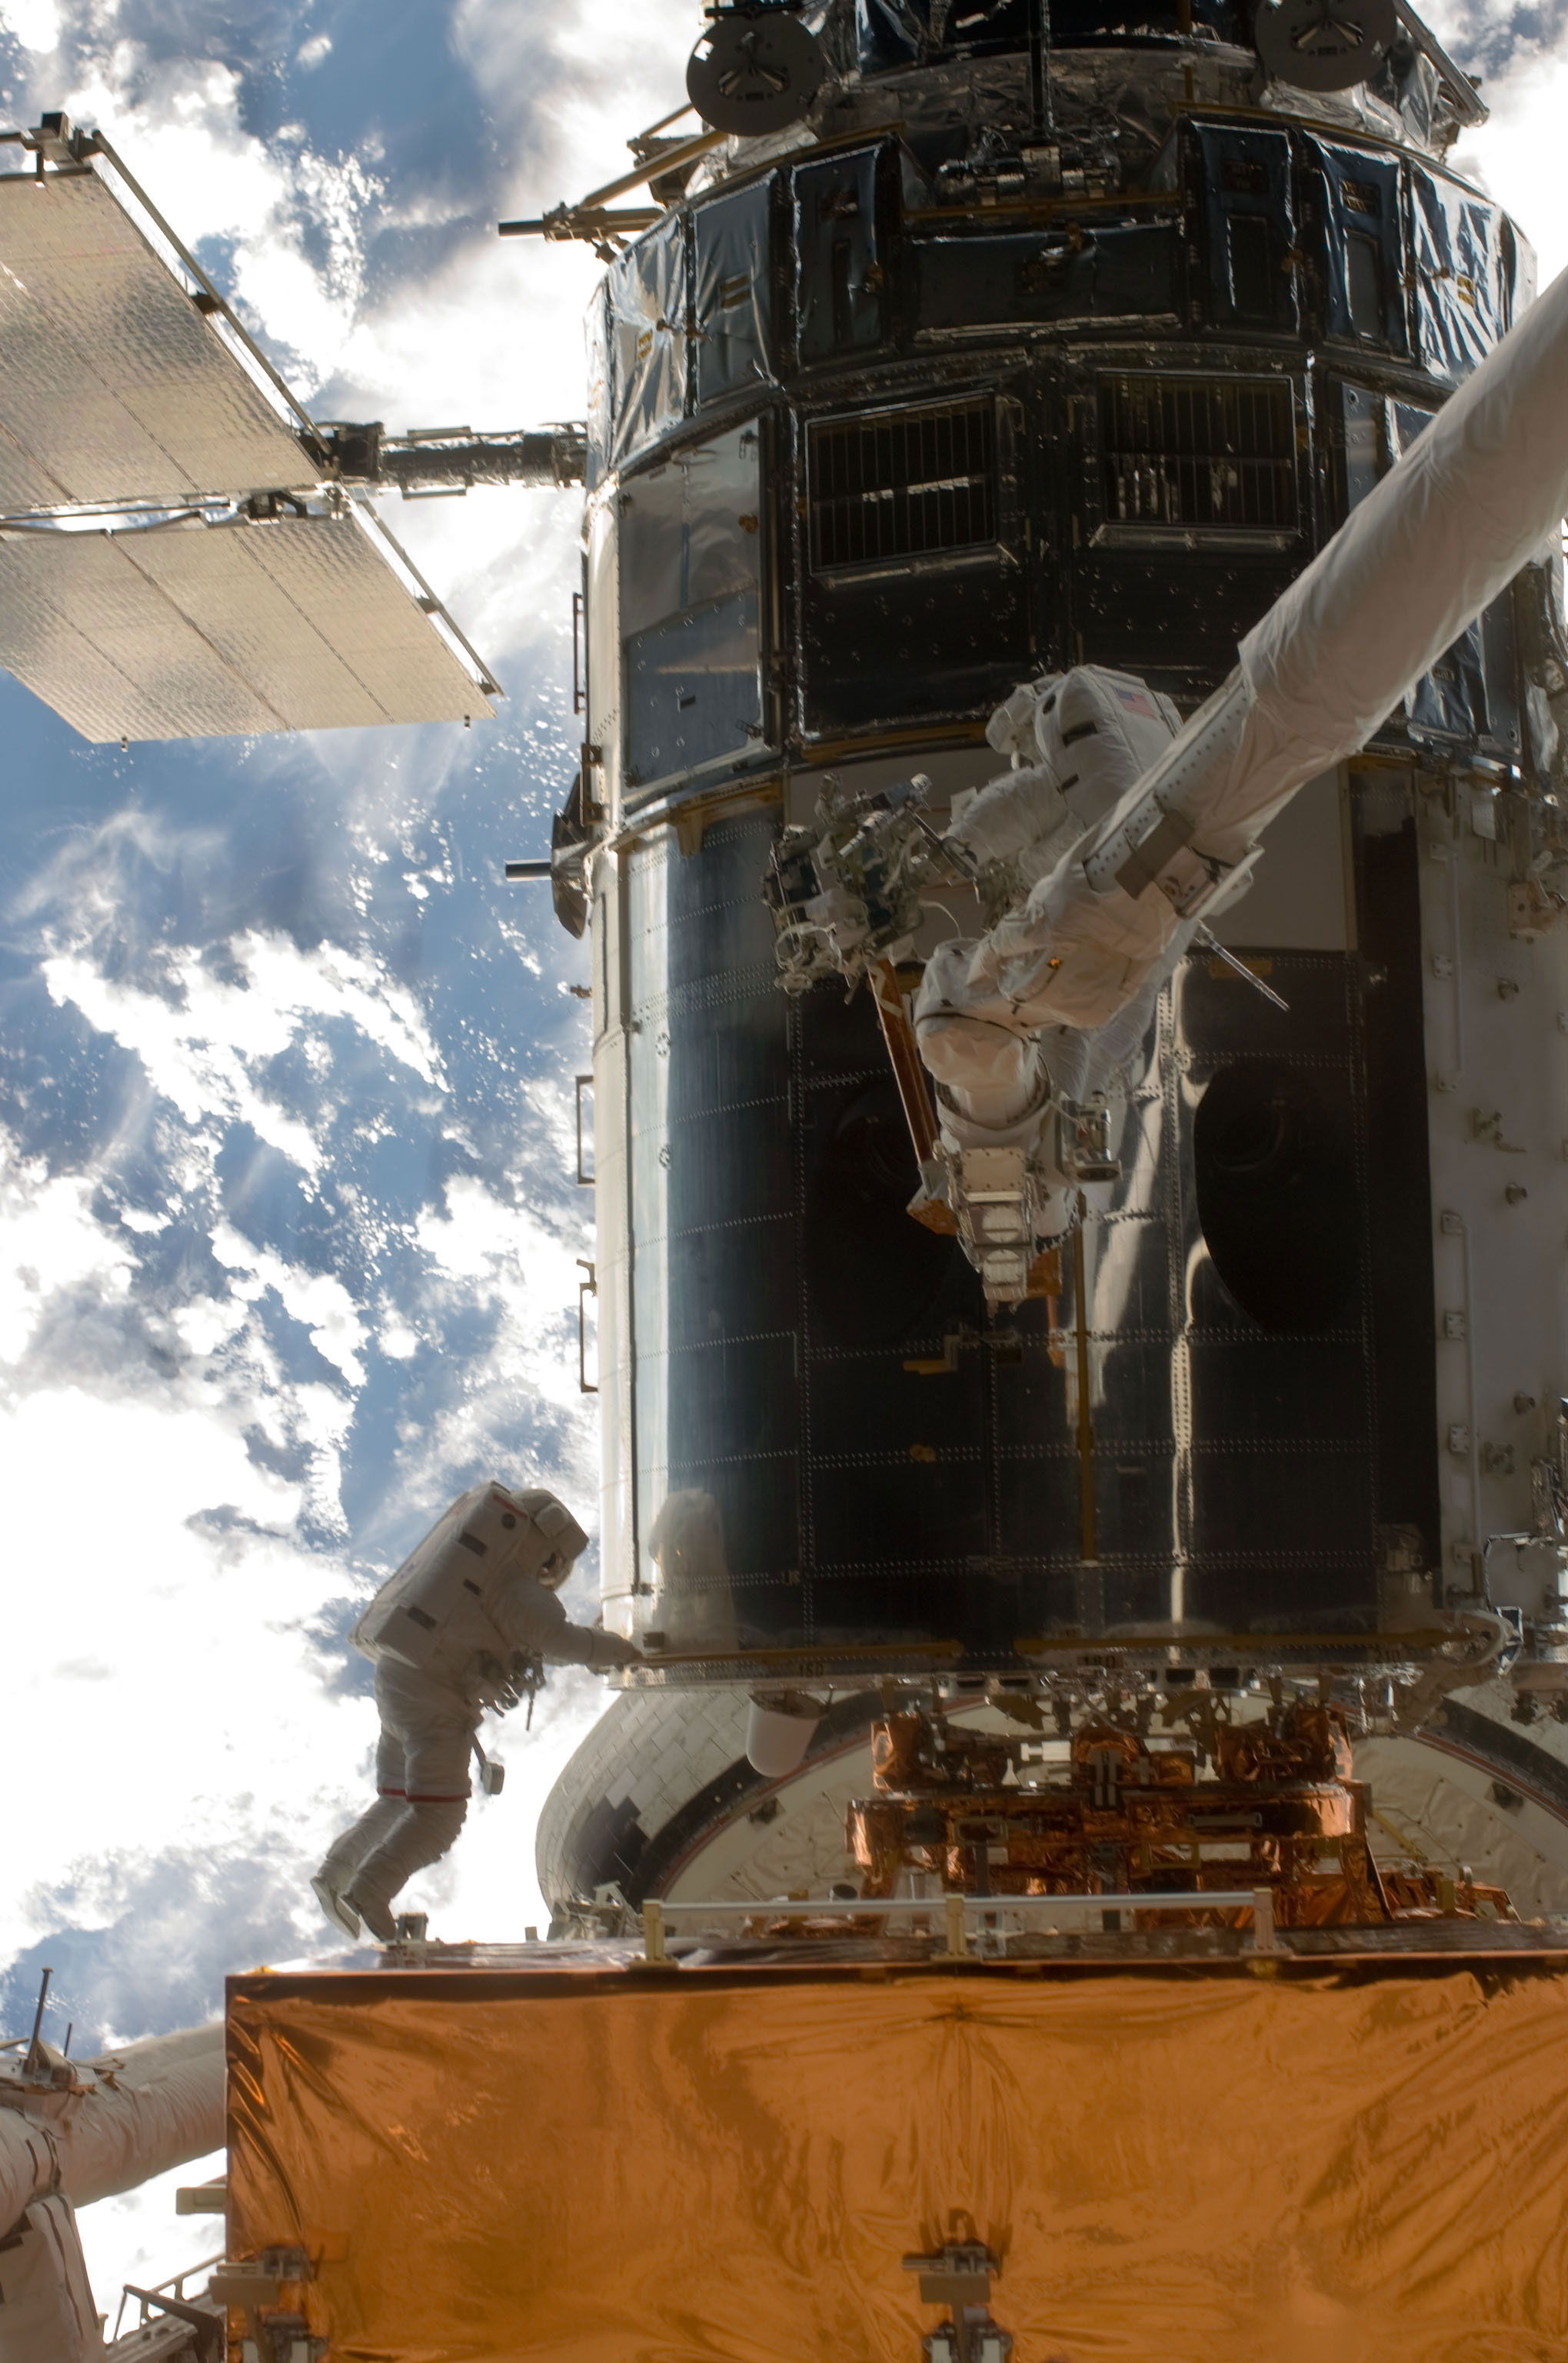 John Grunsfeld and Andrew Feustel, perched alone on the end of the Atlantis’ RMS arm, conduct the first of five STS-125 spacewalks to repair and upgrade the Hubble Space Telescope, temporarily locked down in the cargo bay of the Earth-orbiting shuttle. Credit: NASA